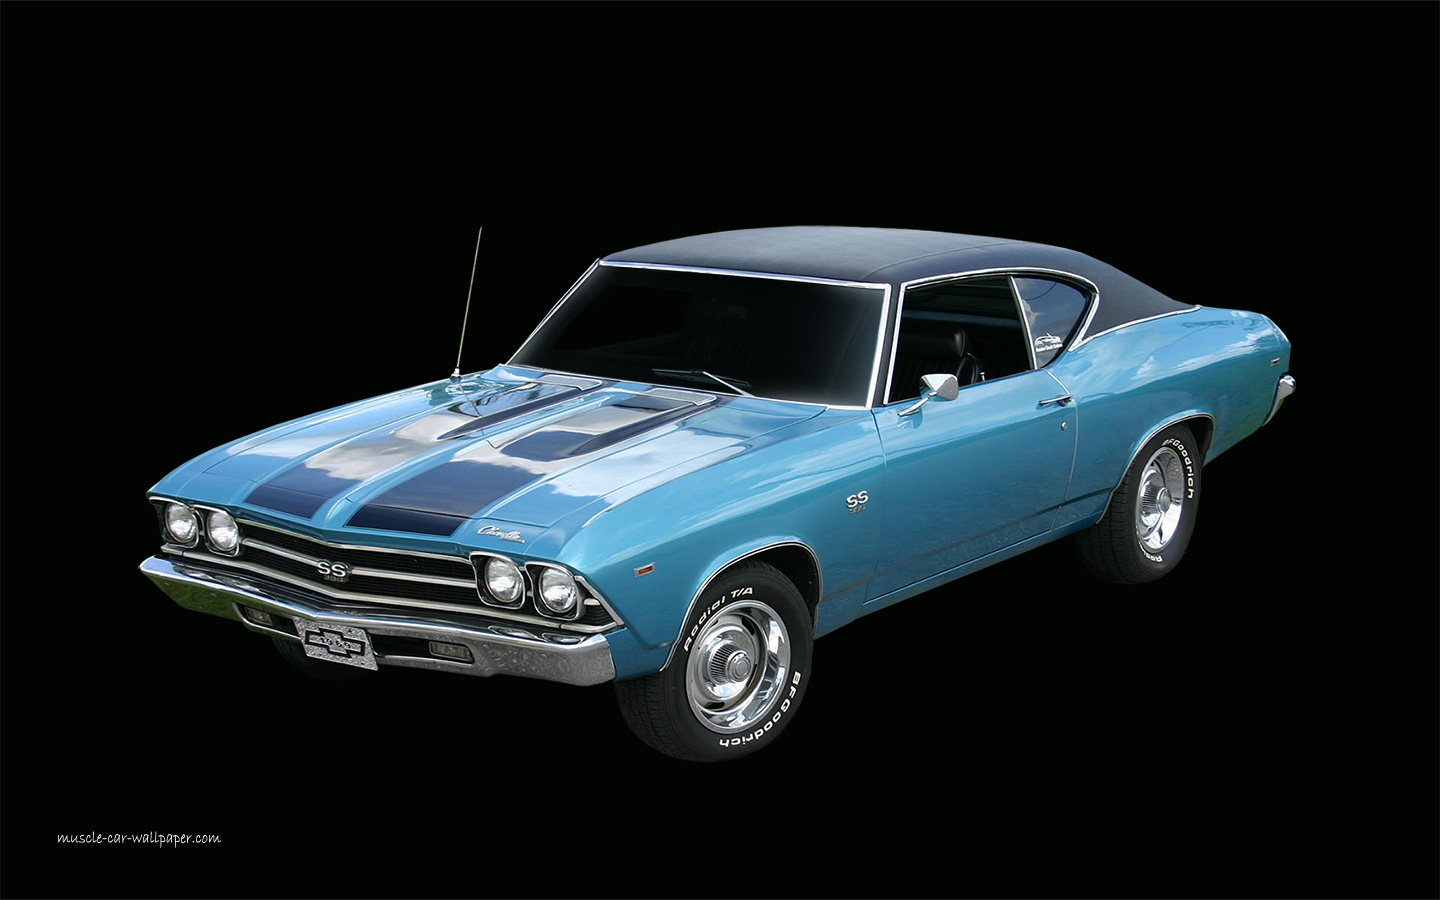 Chevelle SS Wallpaper Pictures 1969 Muscle Car Wallpaper 1440 01